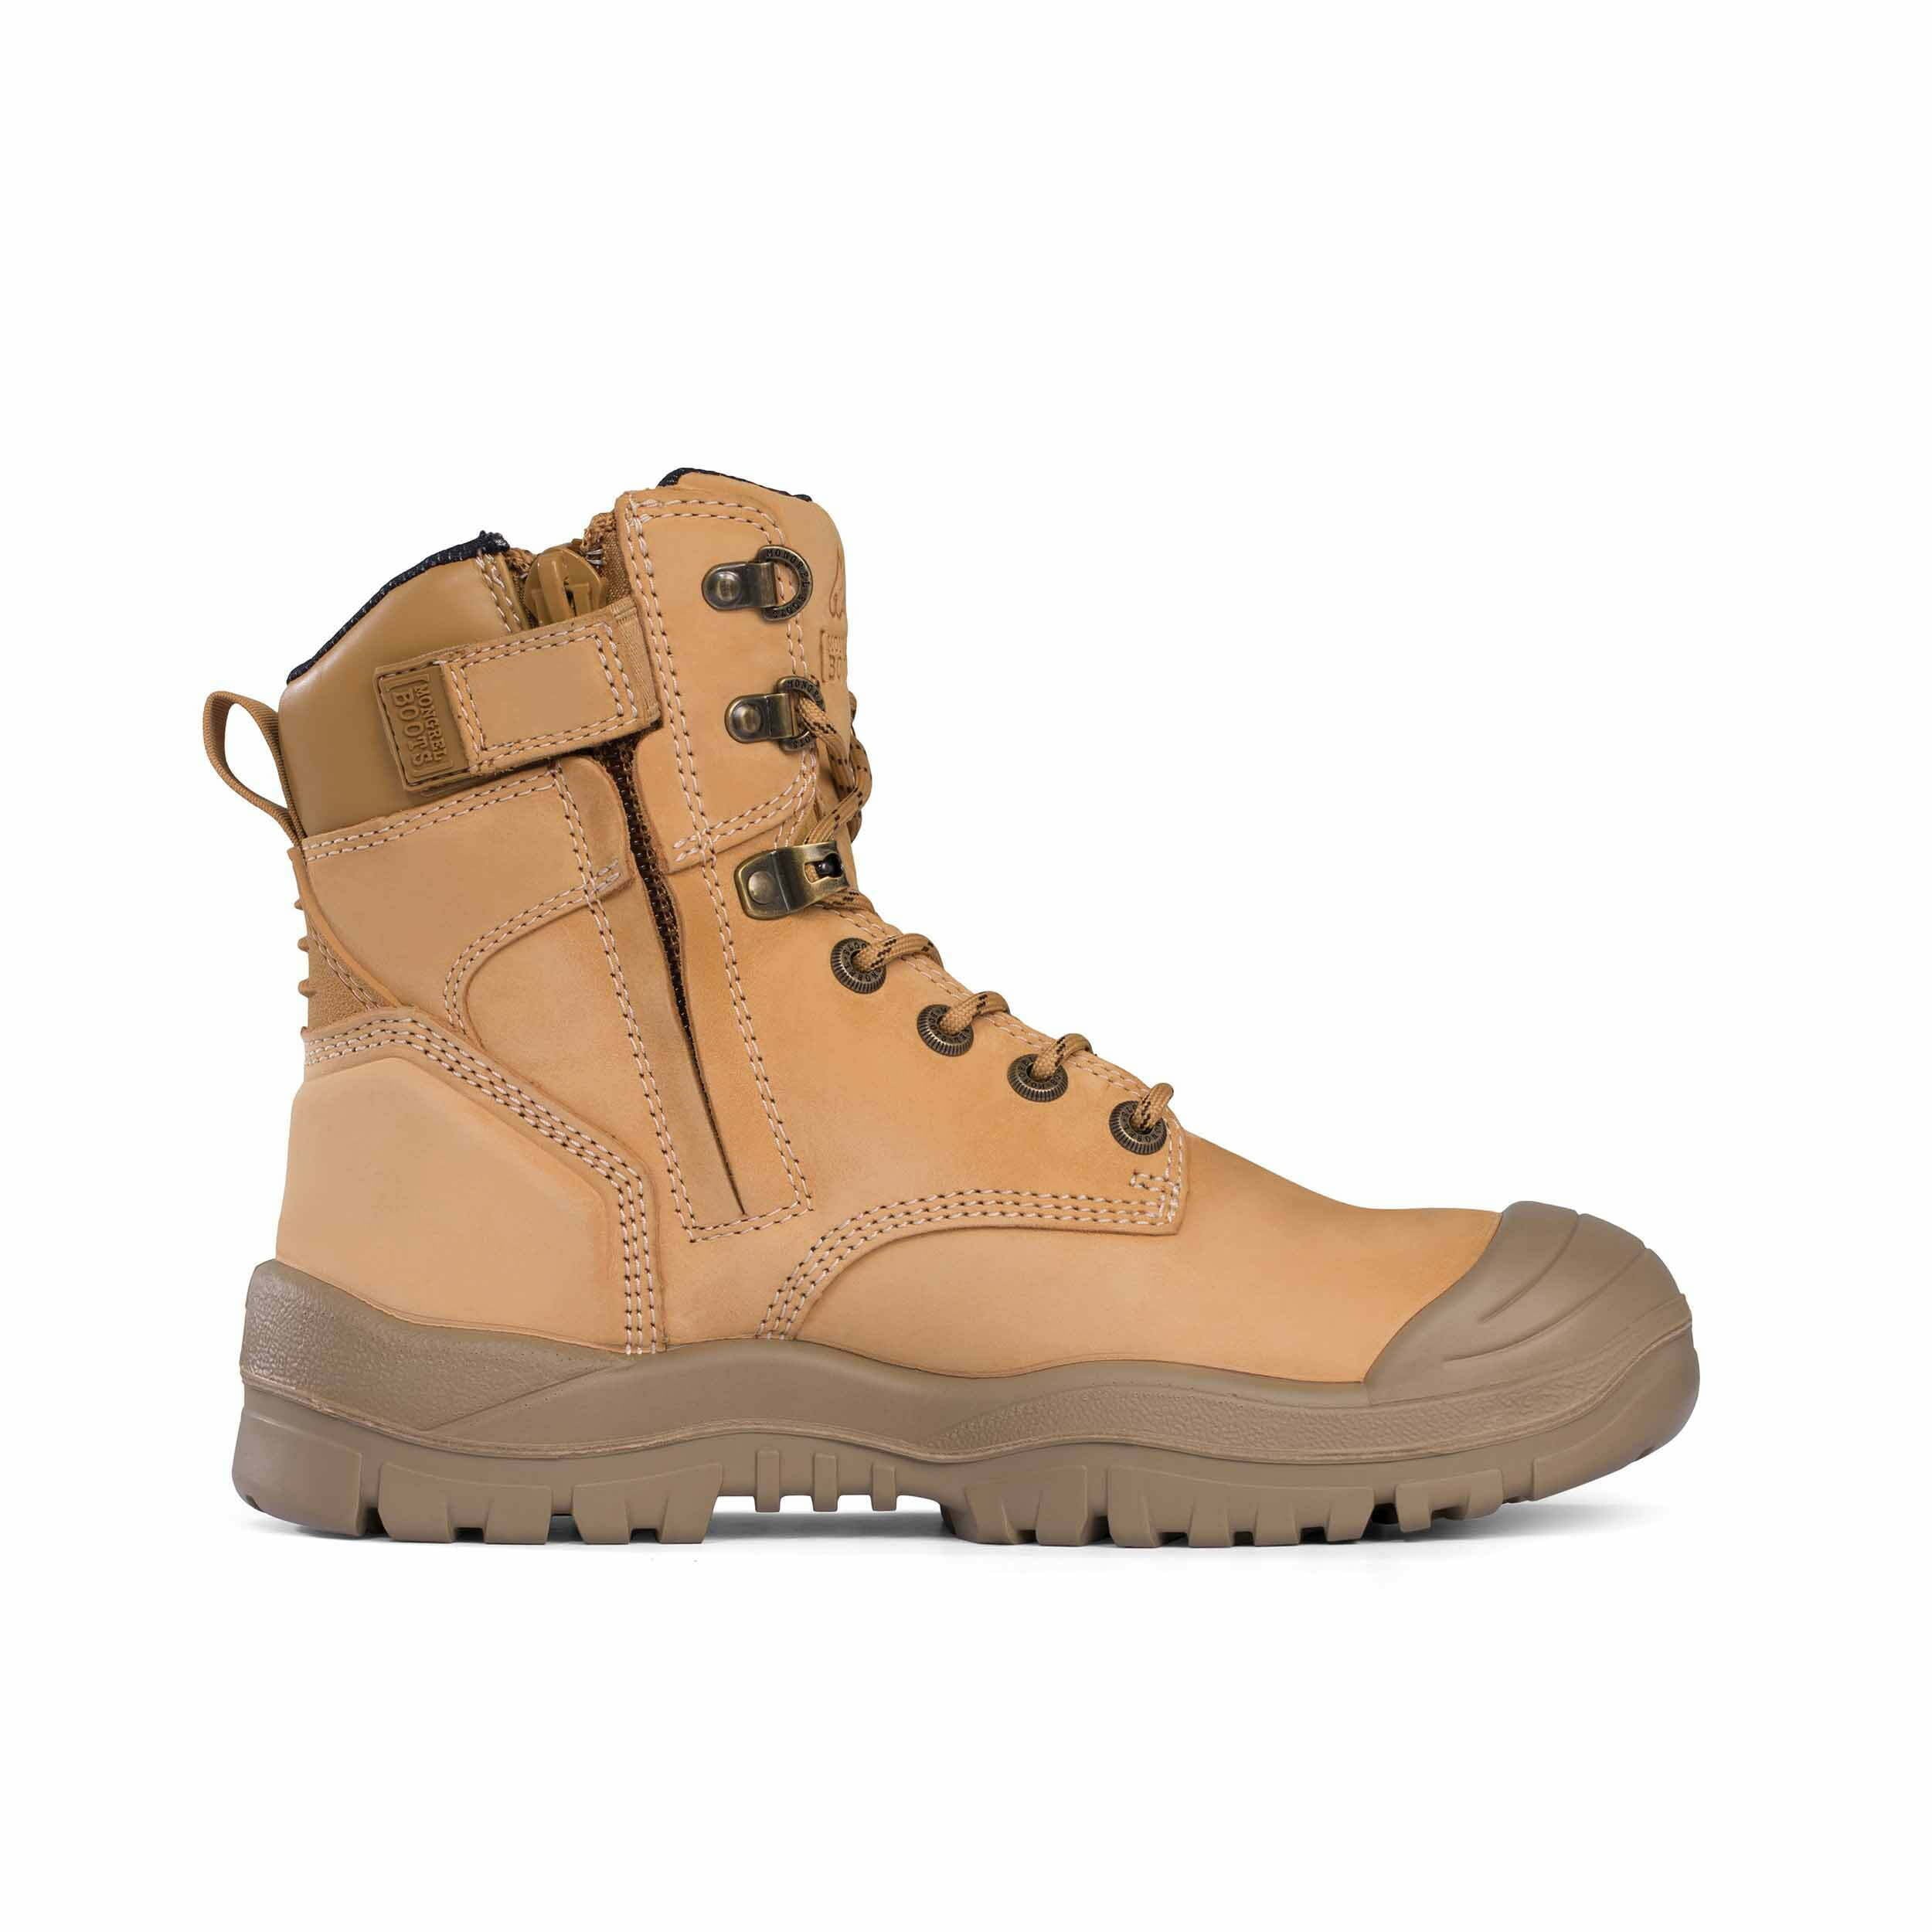 Mongrel 561050 Wheat High Leg Zipsider Safety Boot With Scuff Cap